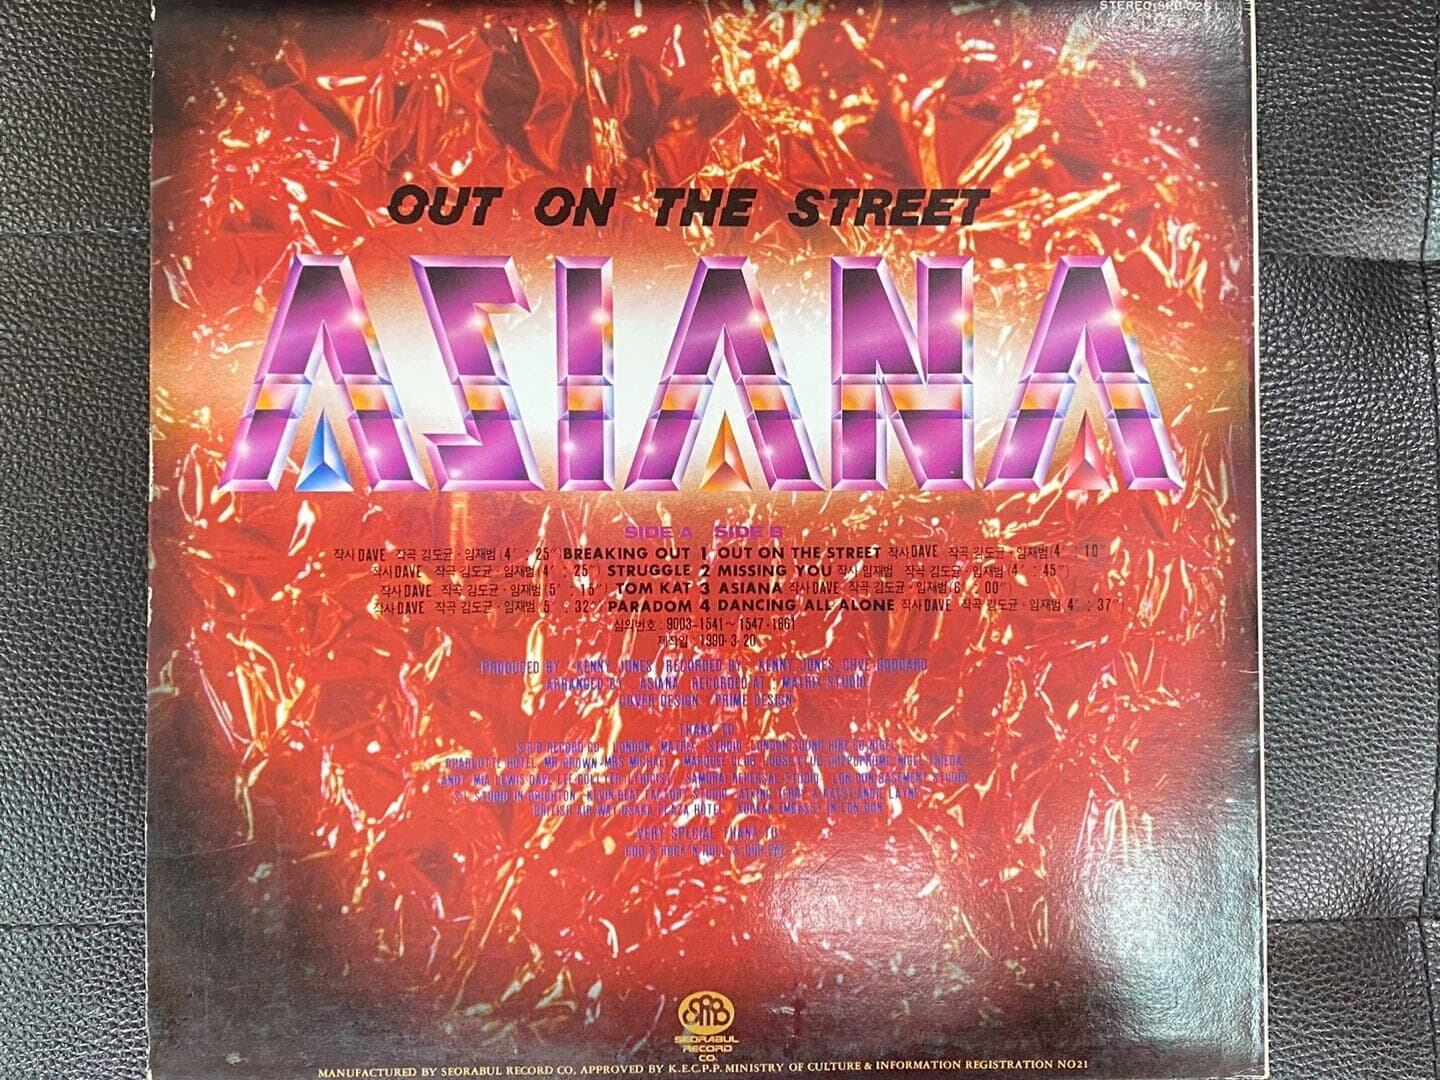 [LP] 아시아나 (Asiana) - Out On The Street LP [서라벌 SRB-0251]